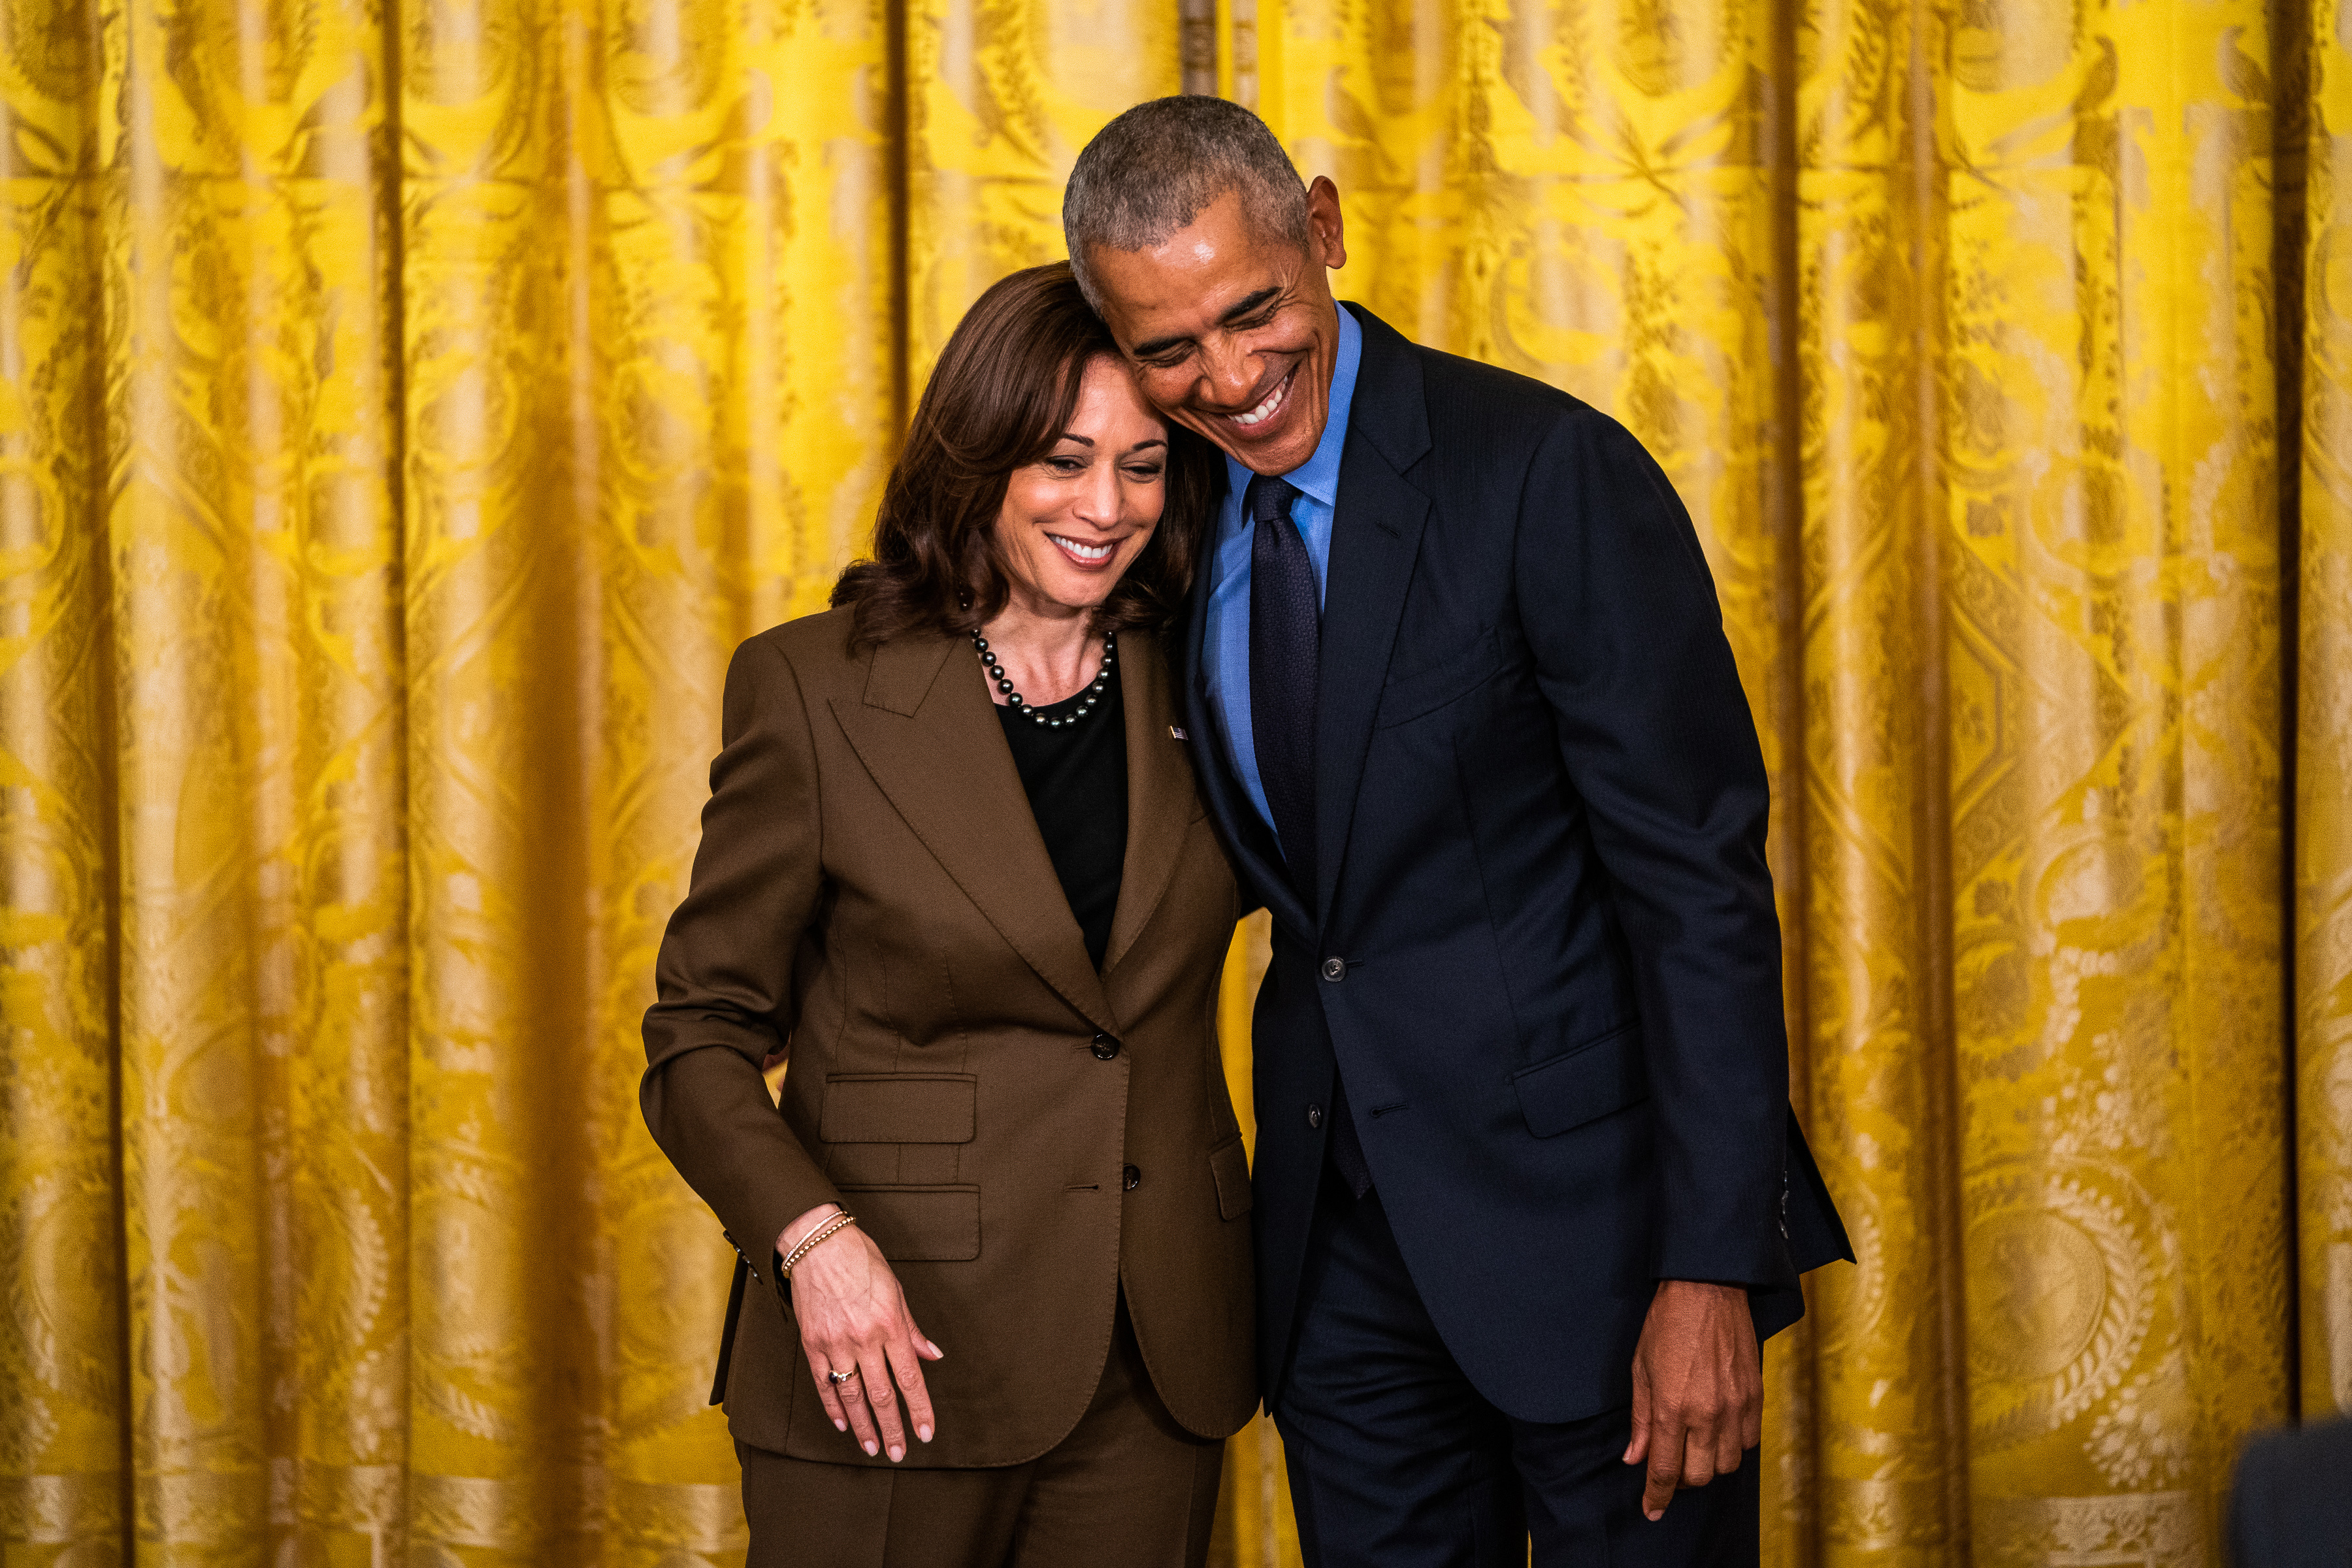 Obamas endorse Kamala Harris, giving her expected but crucial support